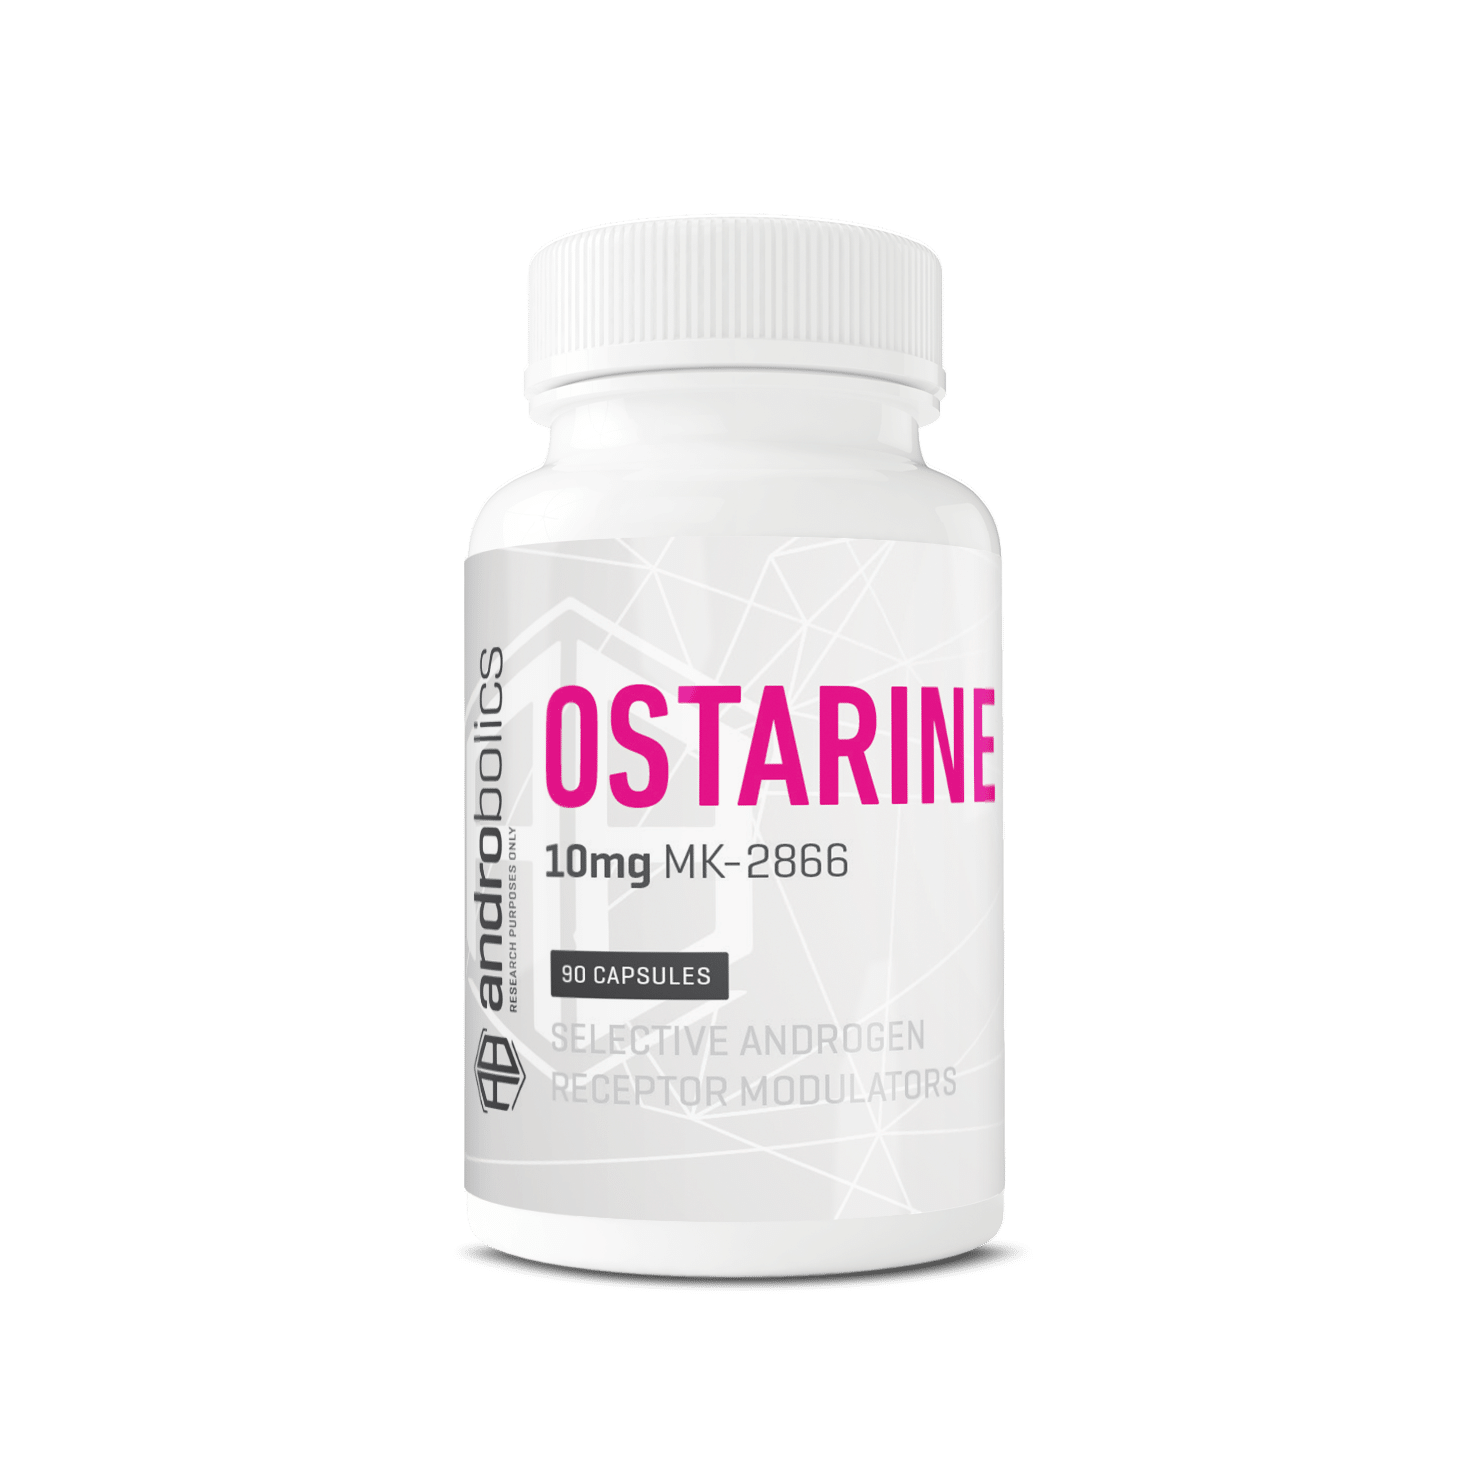 Ostarine - 90 Capsules of 10mg for Improved Muscle Mass and Strength